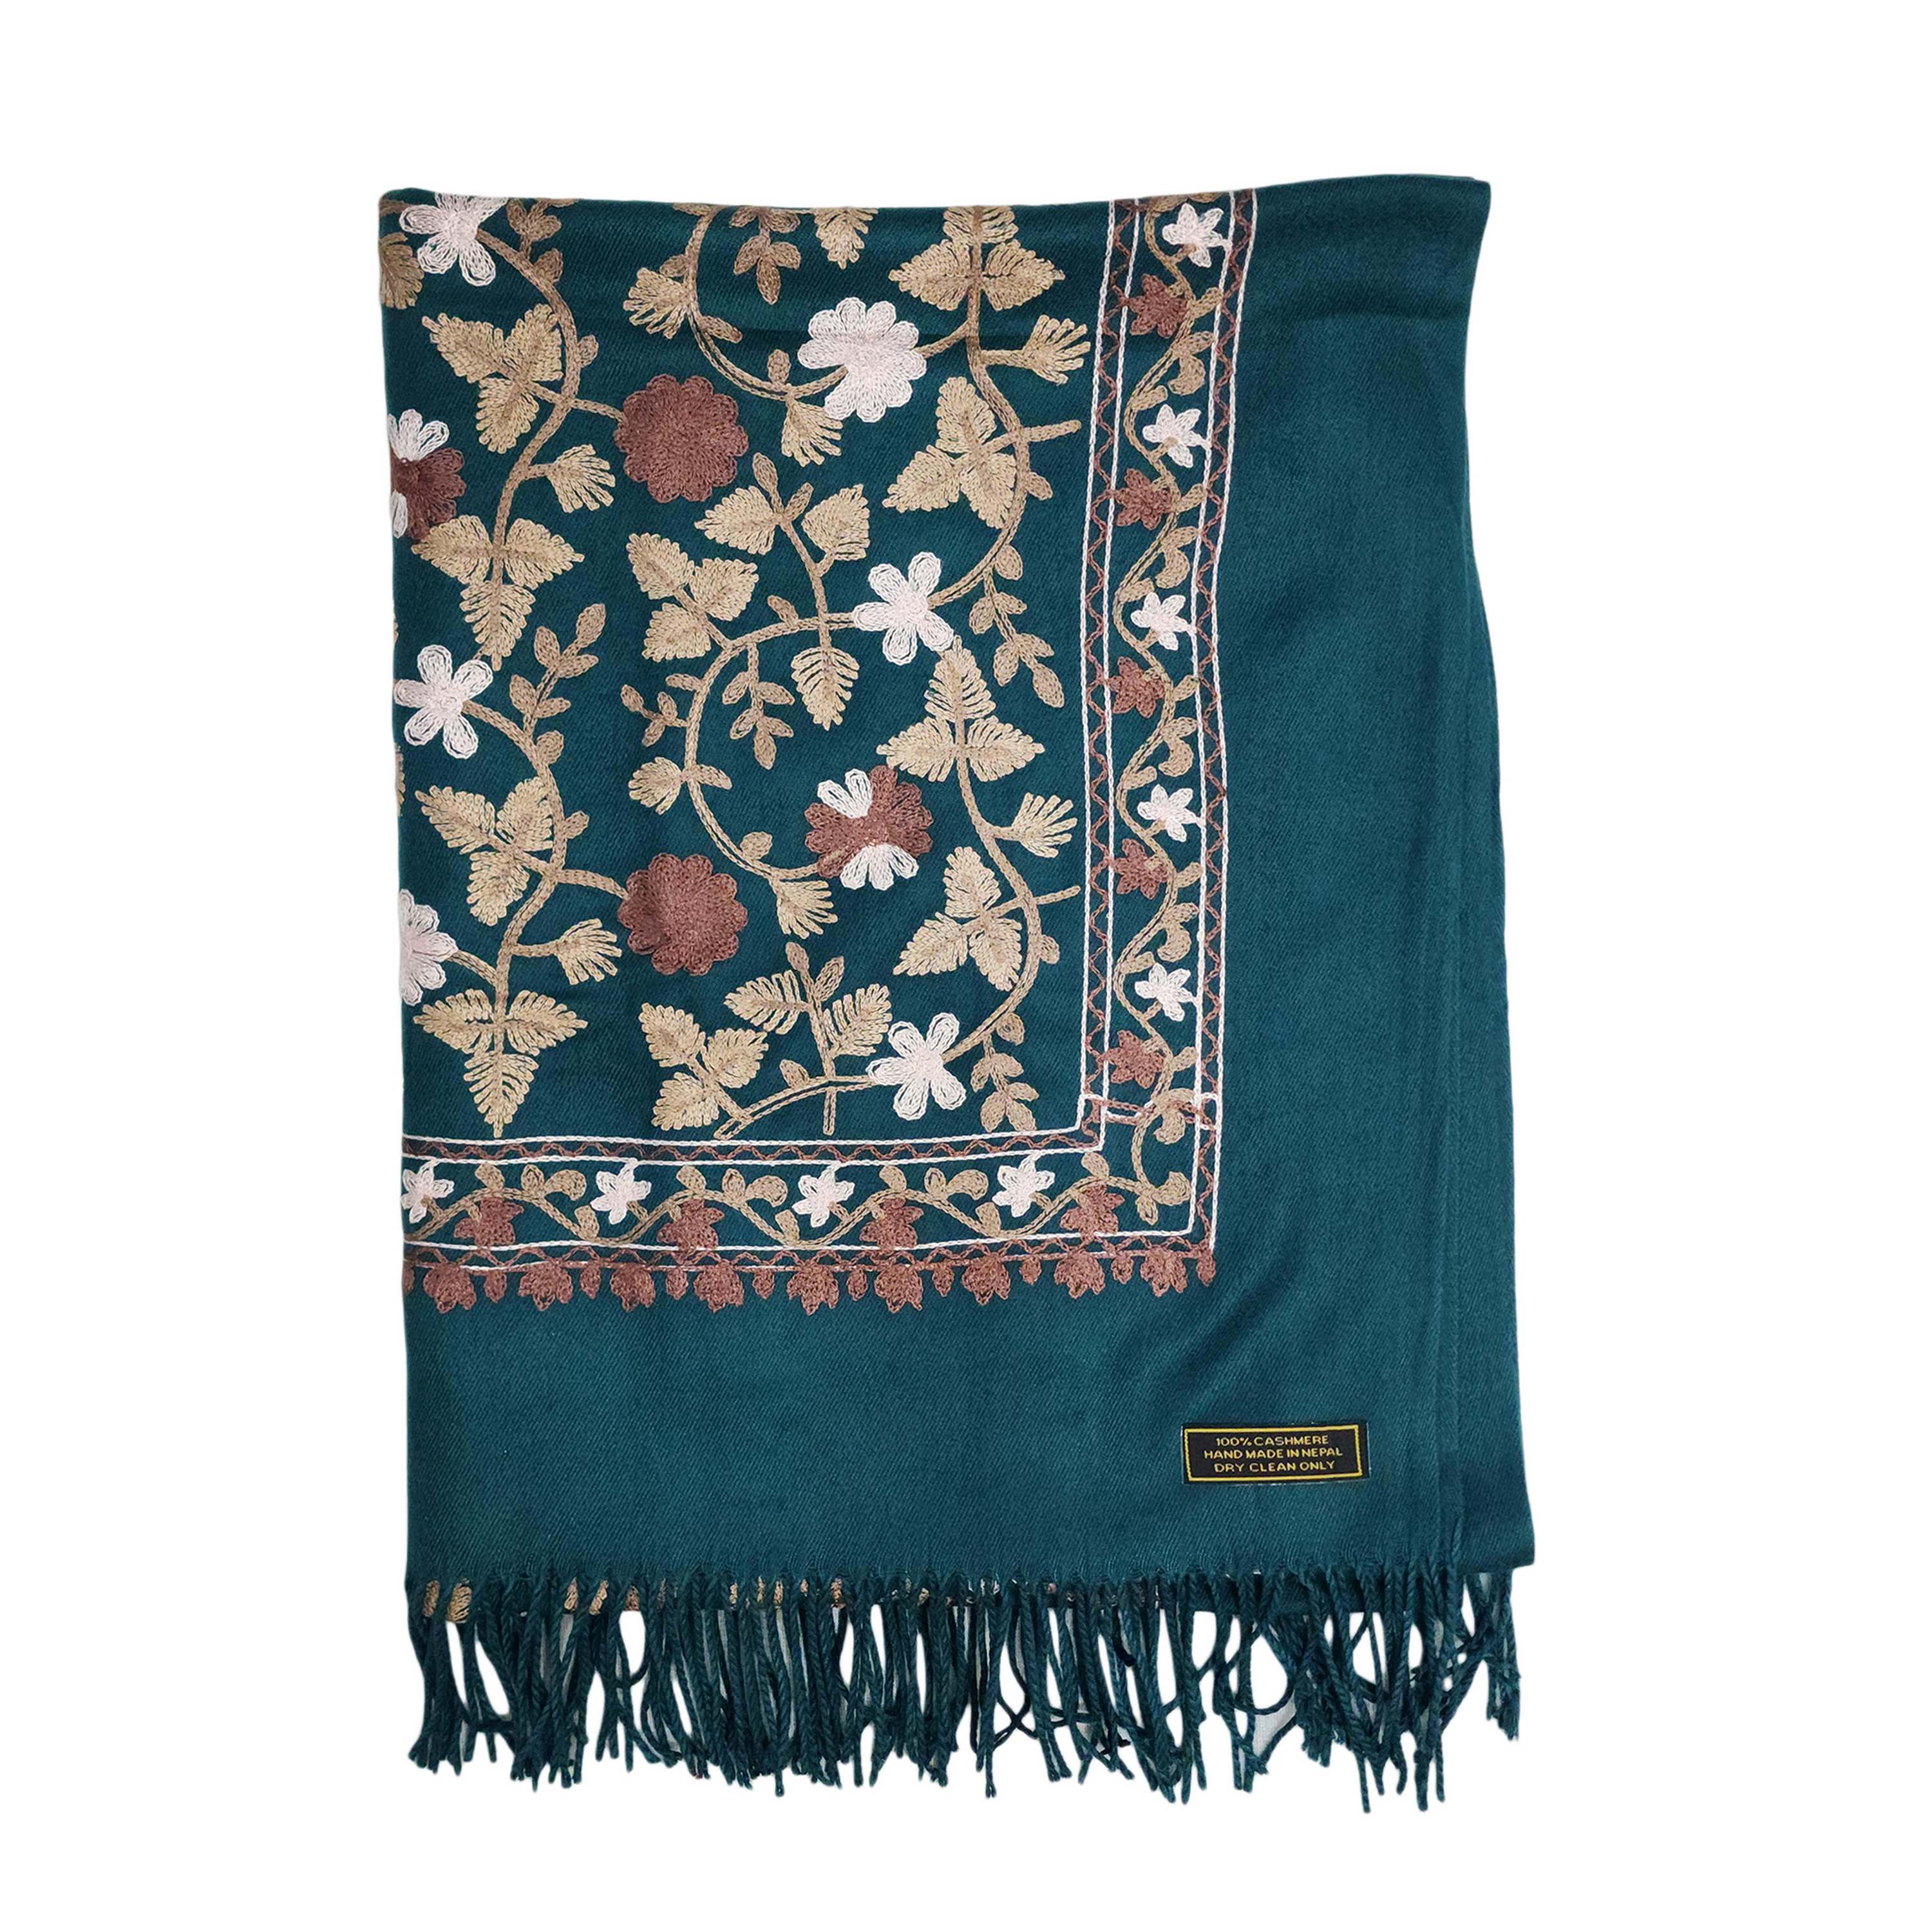 Desigener Shawl, Thick Nepali Shawl, With Heavy Embroidery, Color green